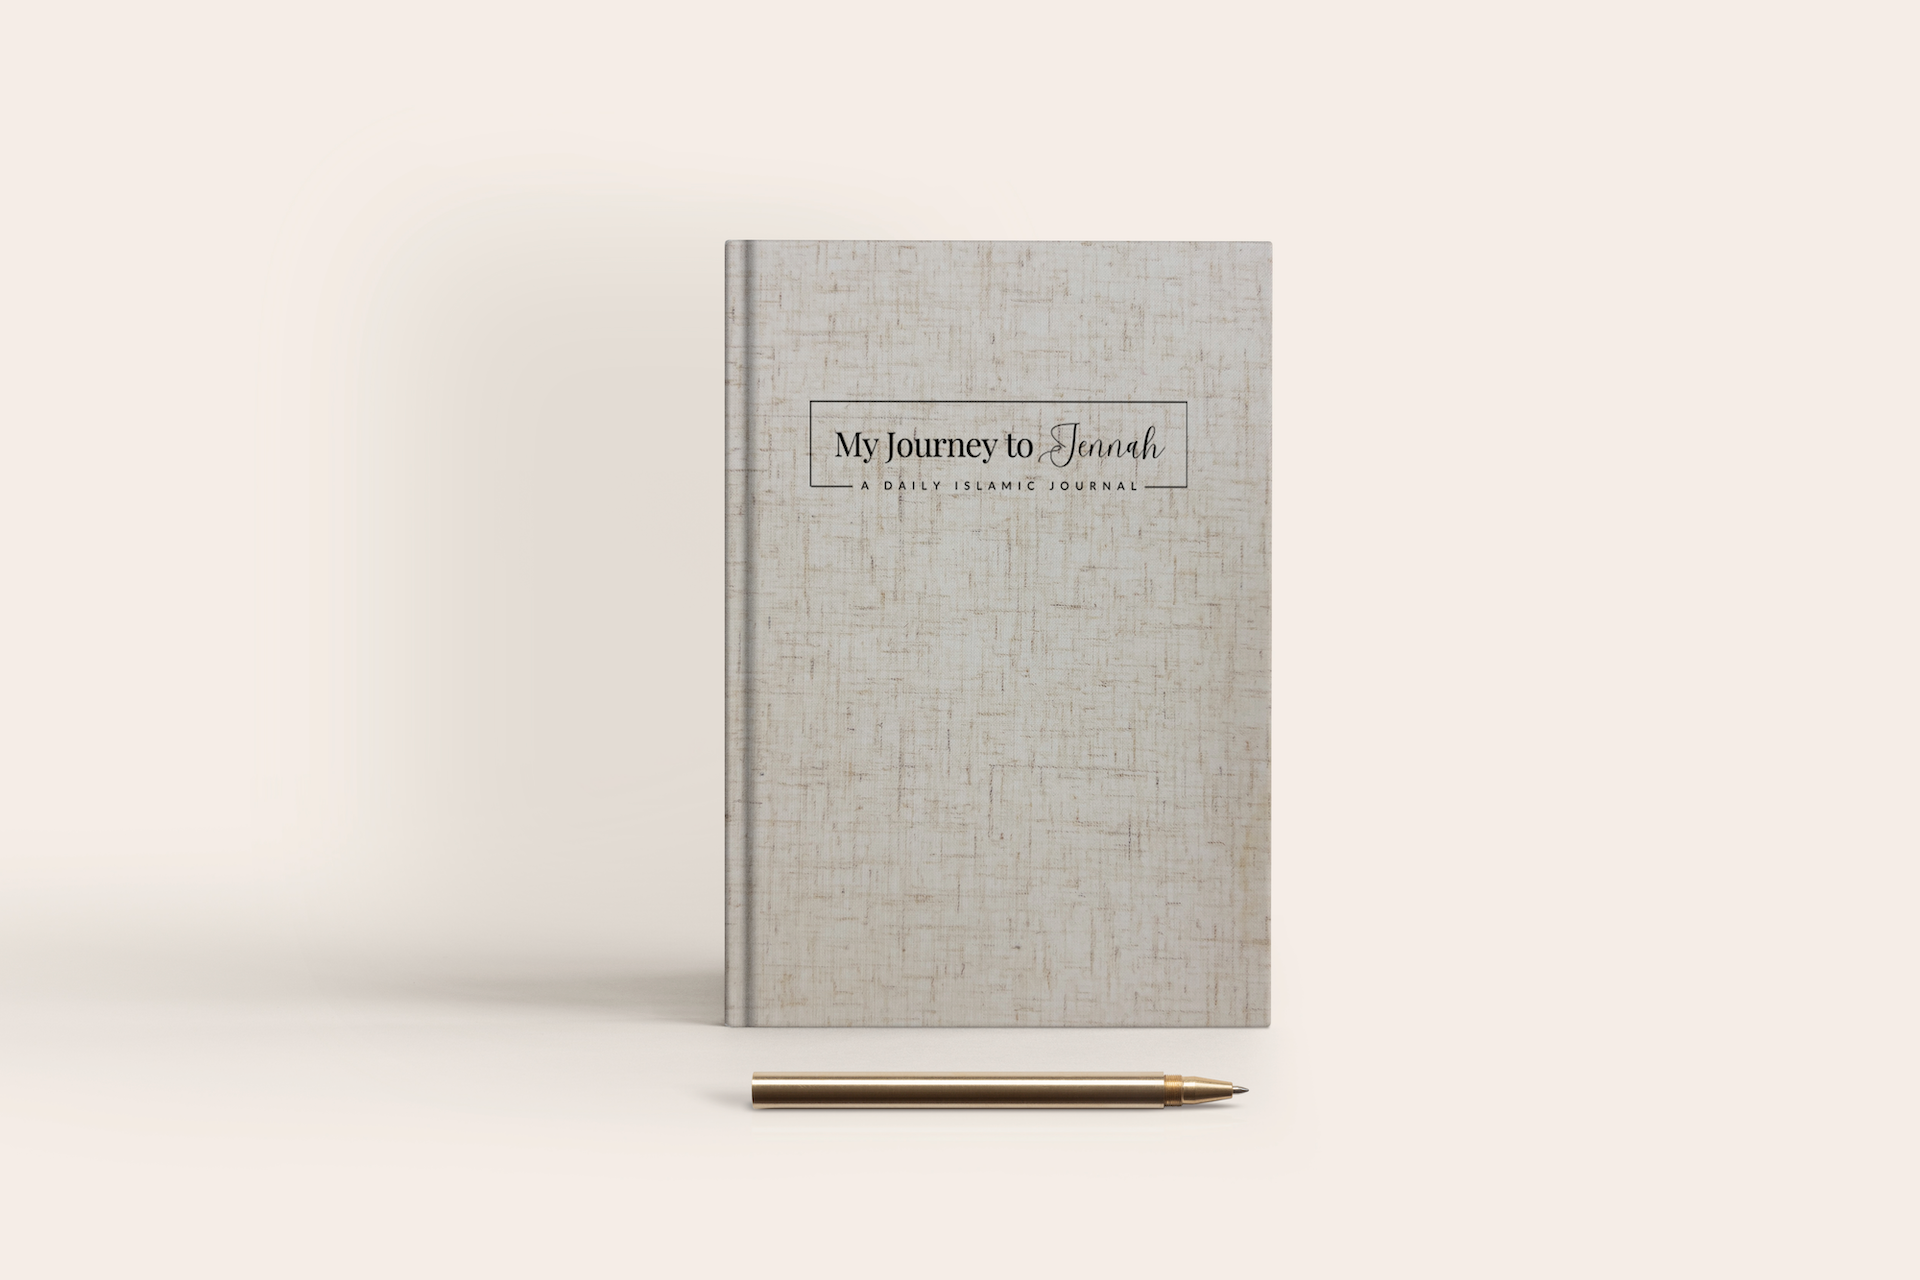 Discover 'My Journey to Jennah,' the Islamic journal for deepening faith and mindfulness. Enhance your daily reflections with this faith-focused journal.